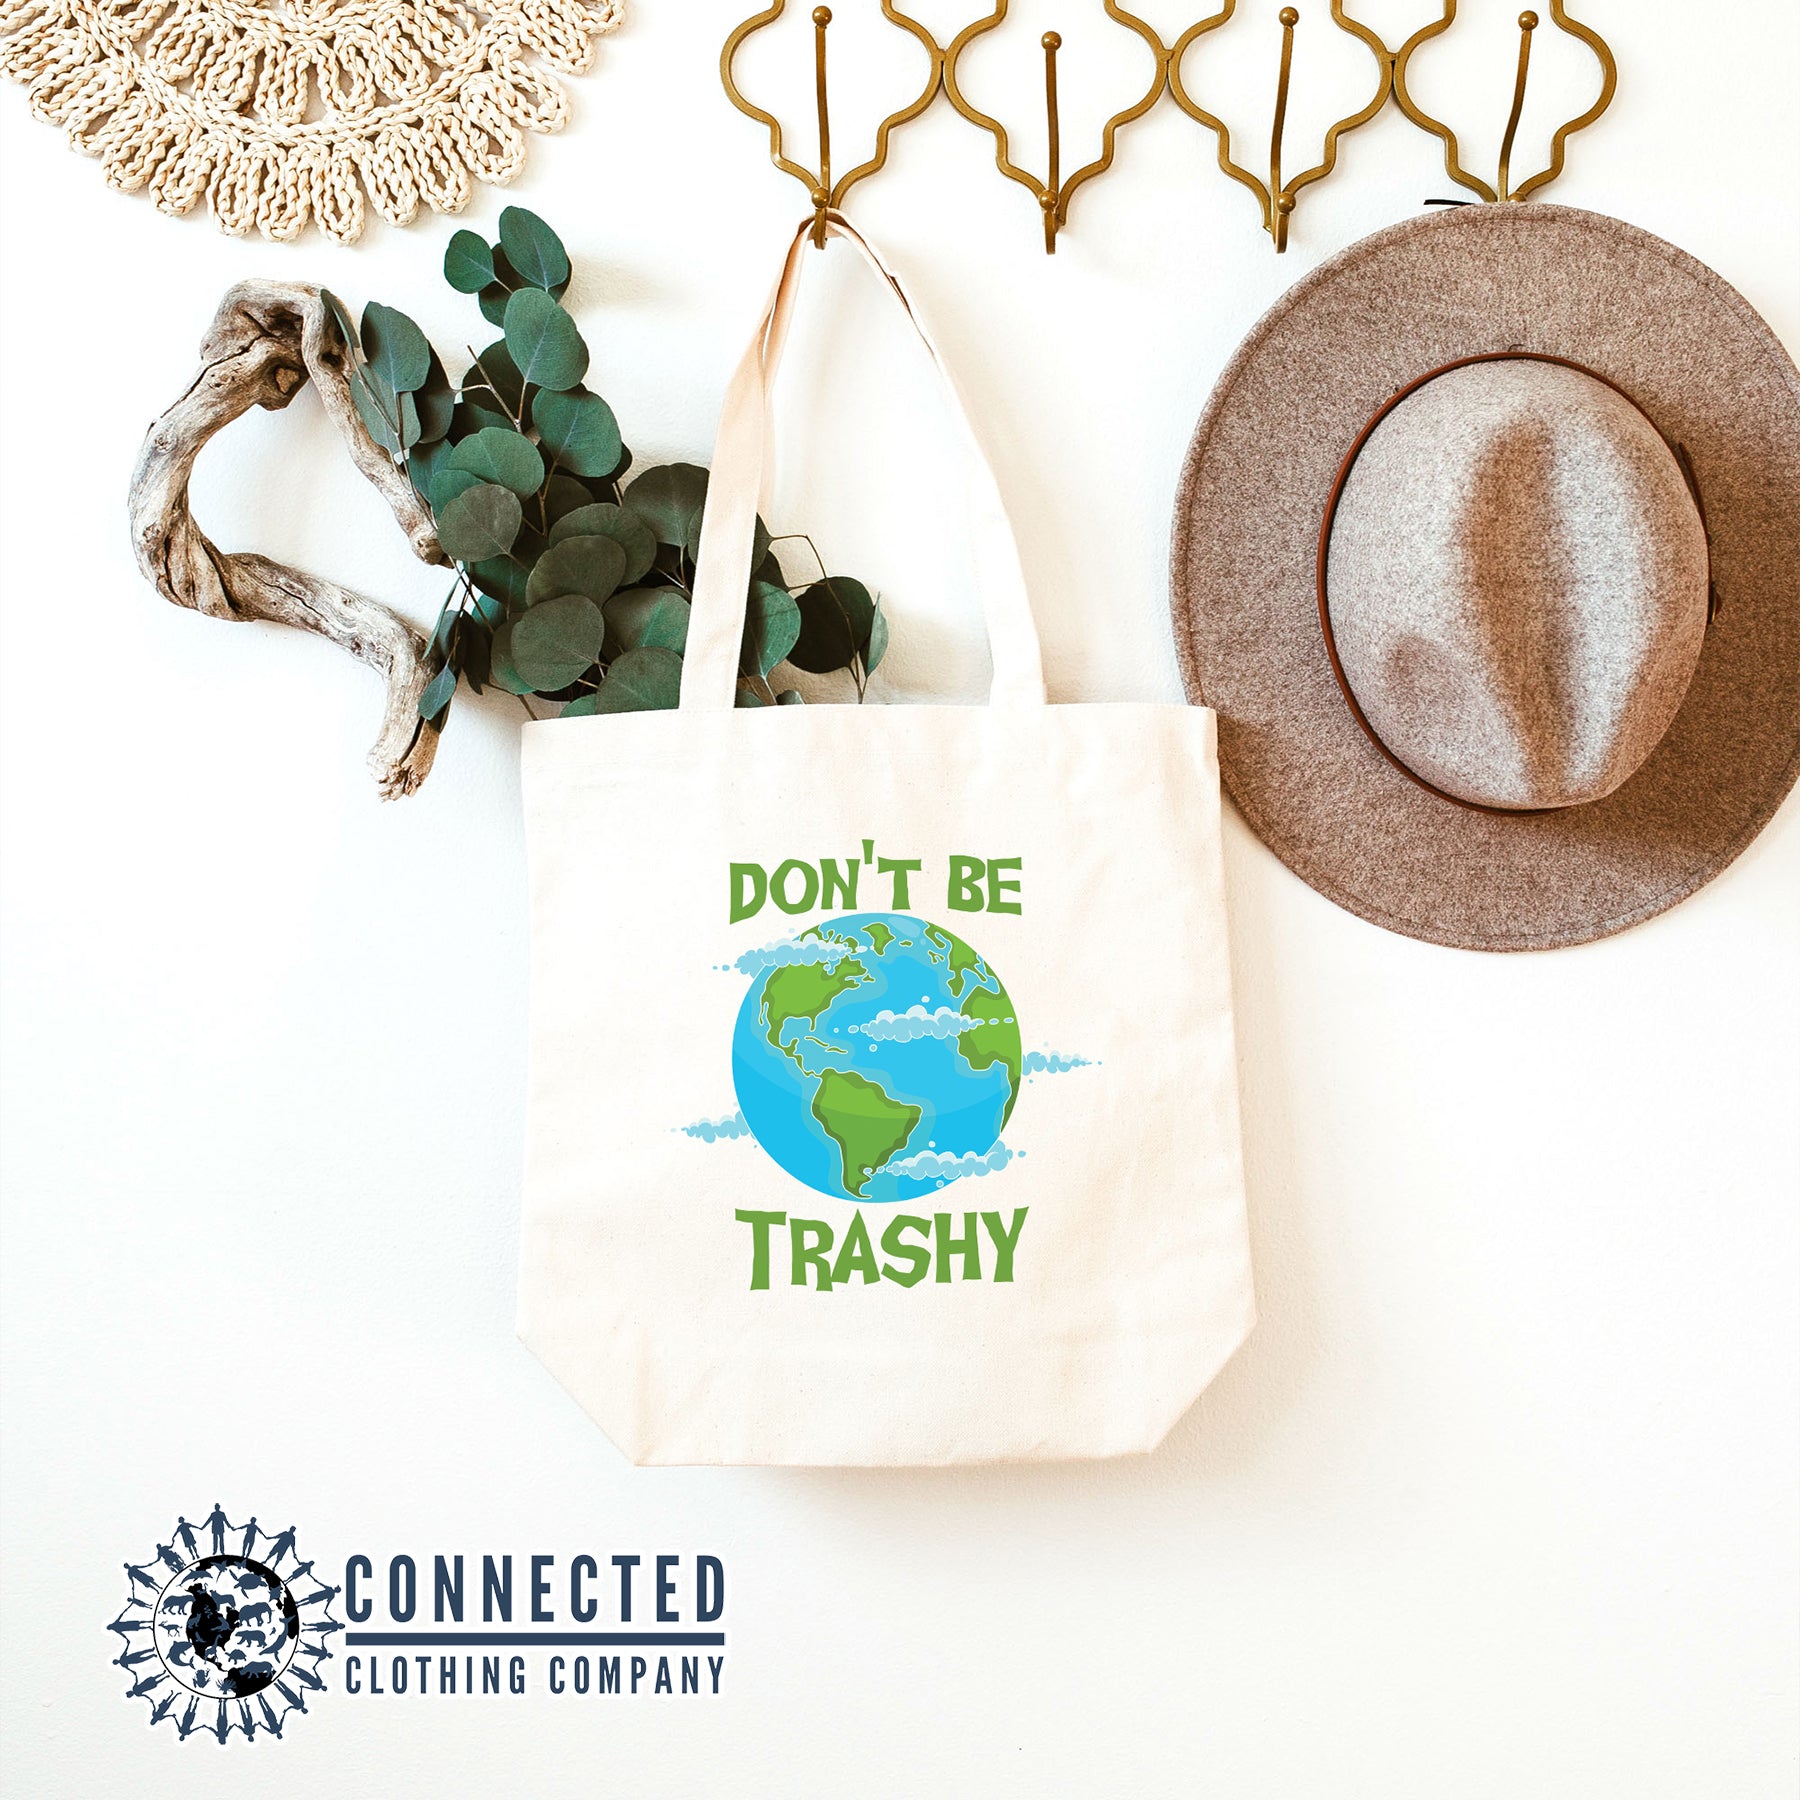 Don't Be Trashy Tote Bag - mirandotubolsillo - 10% of proceeds donated to mission blue ocean conservation